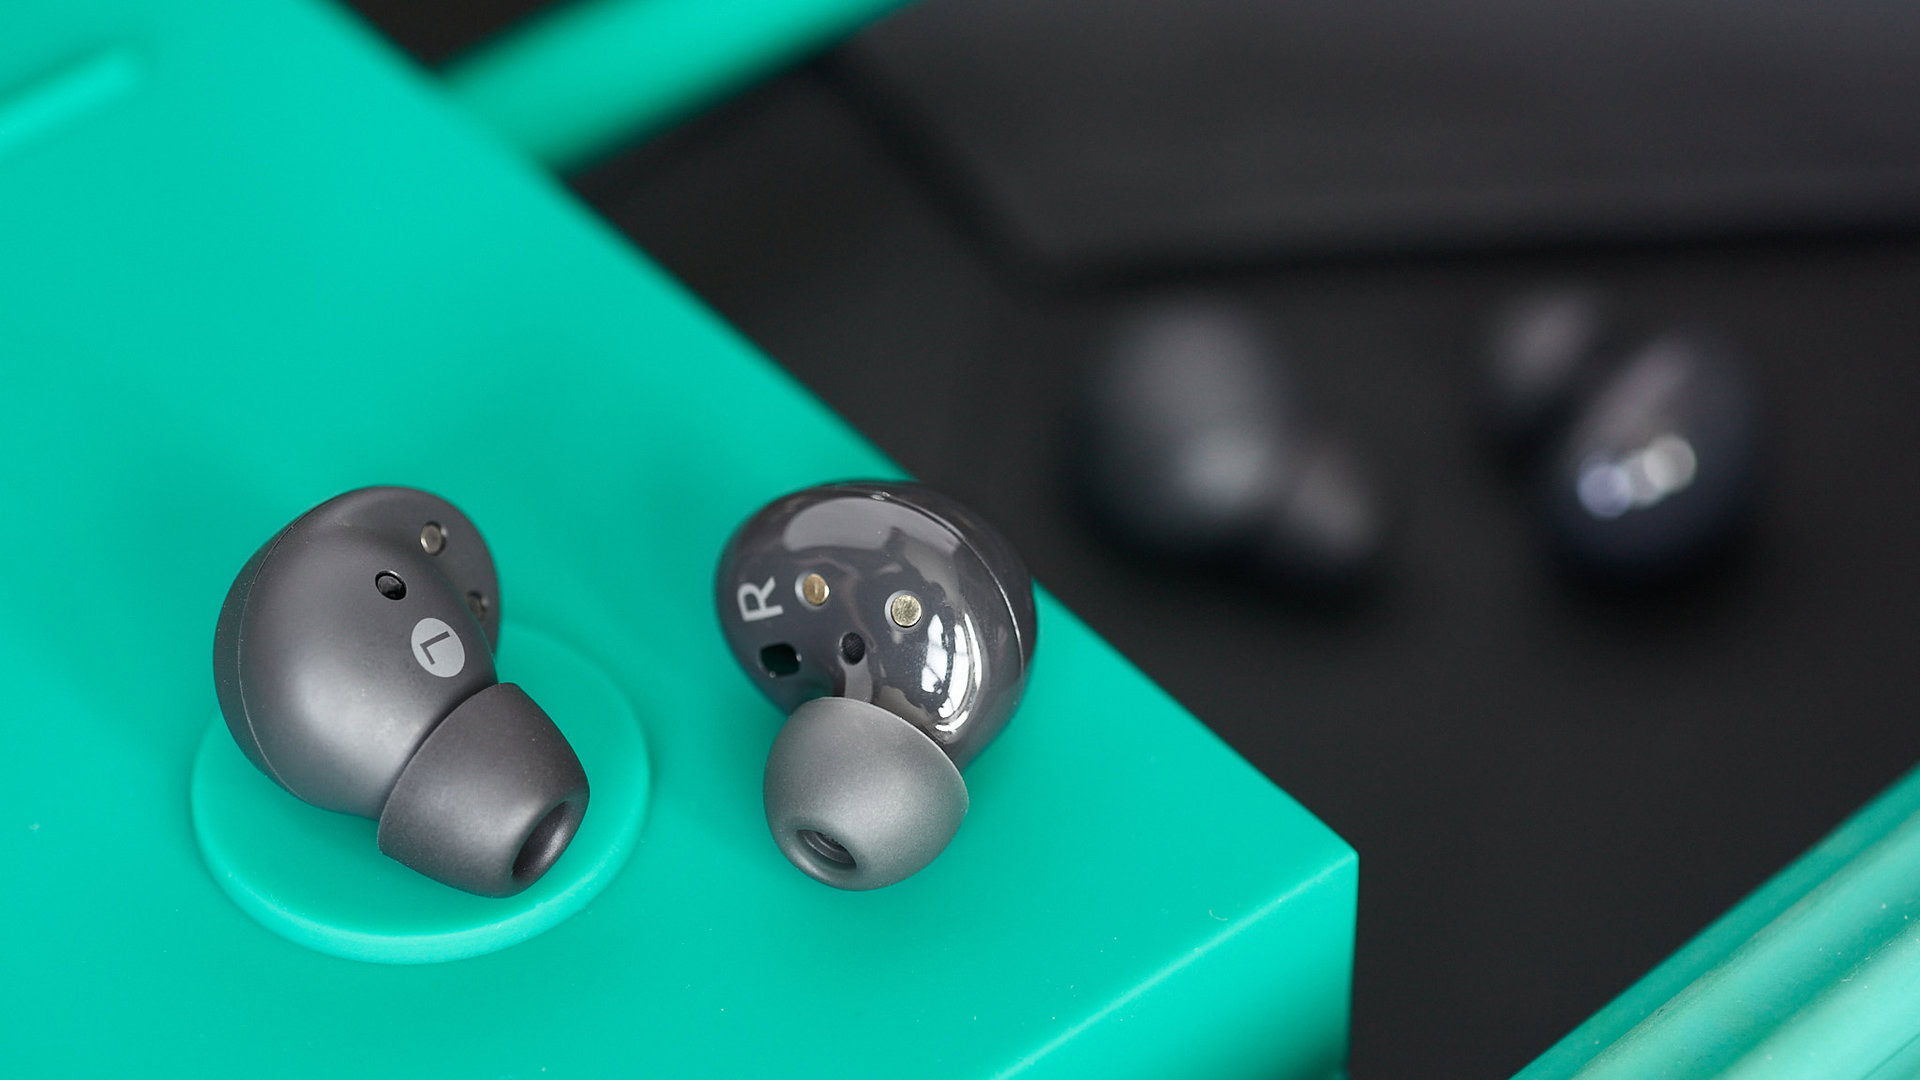 Samsung Galaxy Buds2 Pro Review: The Best Earbuds for Galaxy Phones